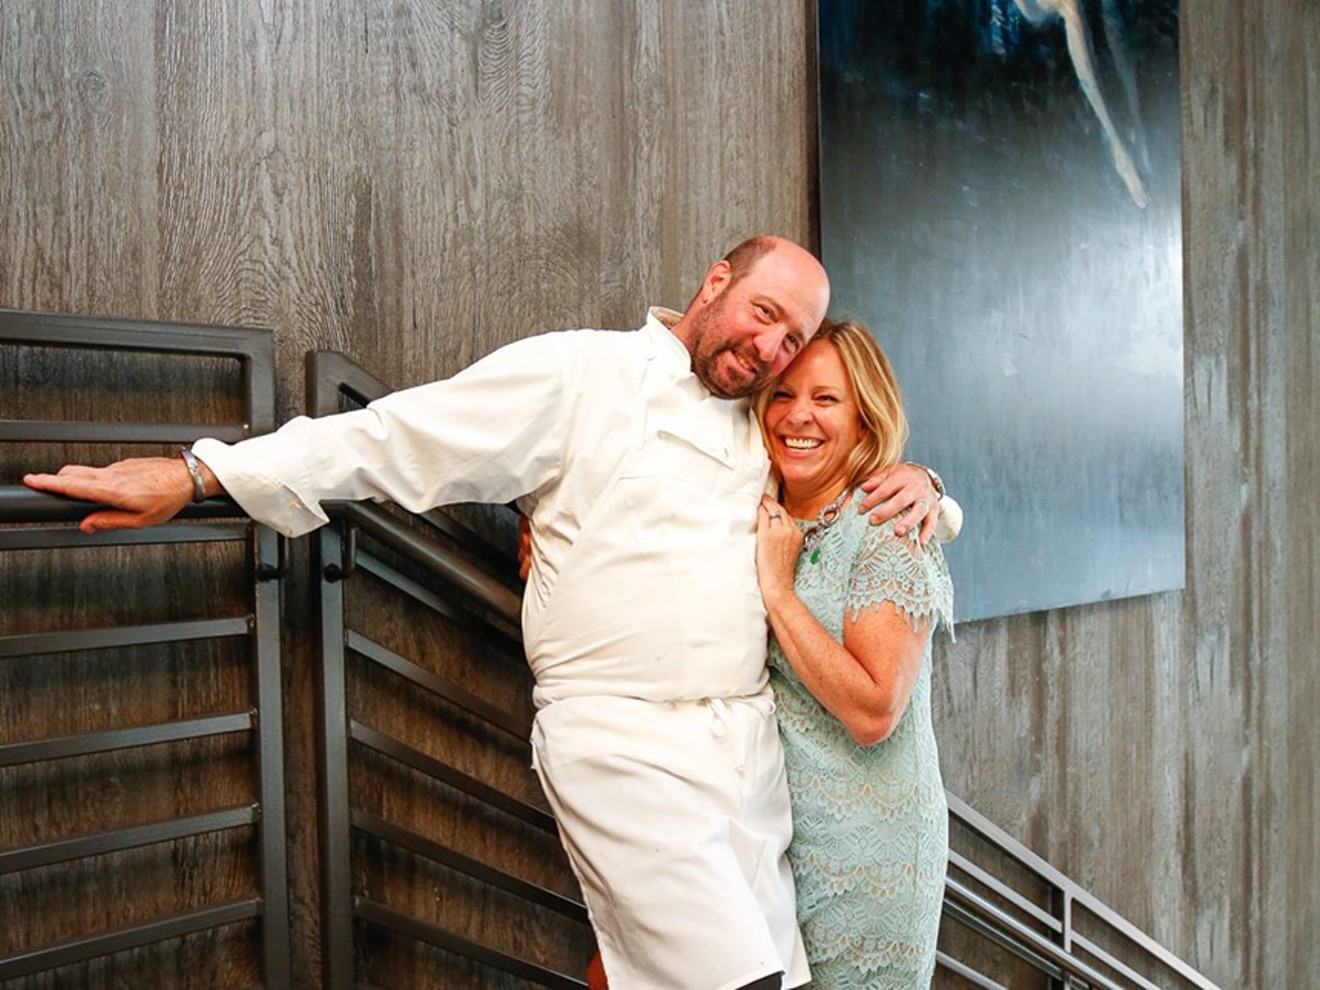 Frank and Jacqueline Bonanno have a Creating Happy People fee at all of their restaurants.